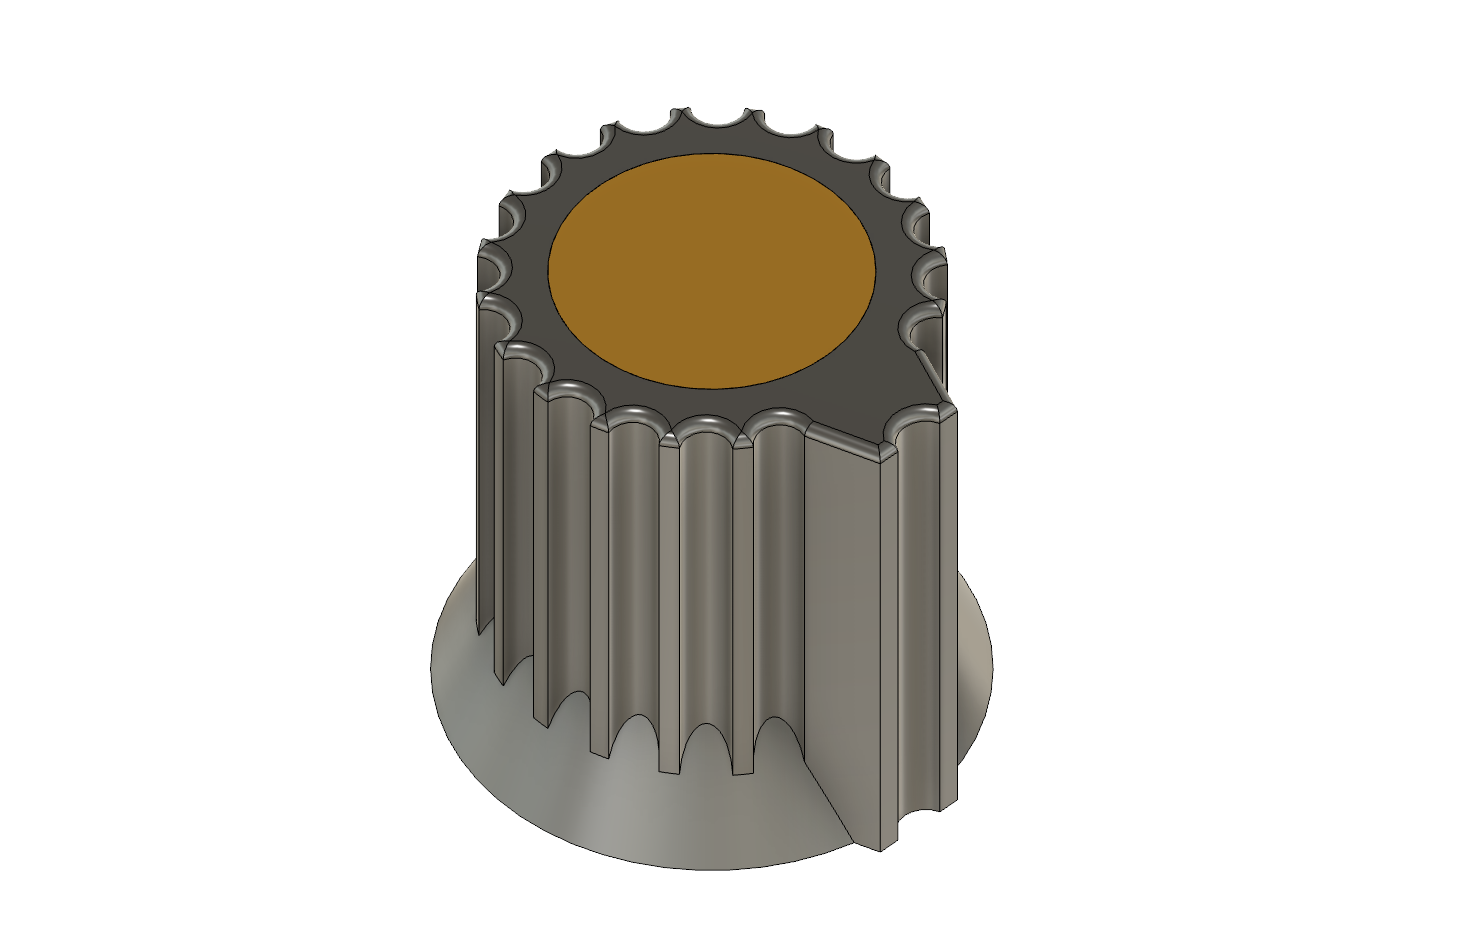 Potentiometer knob with an axis diameter of 4 mm